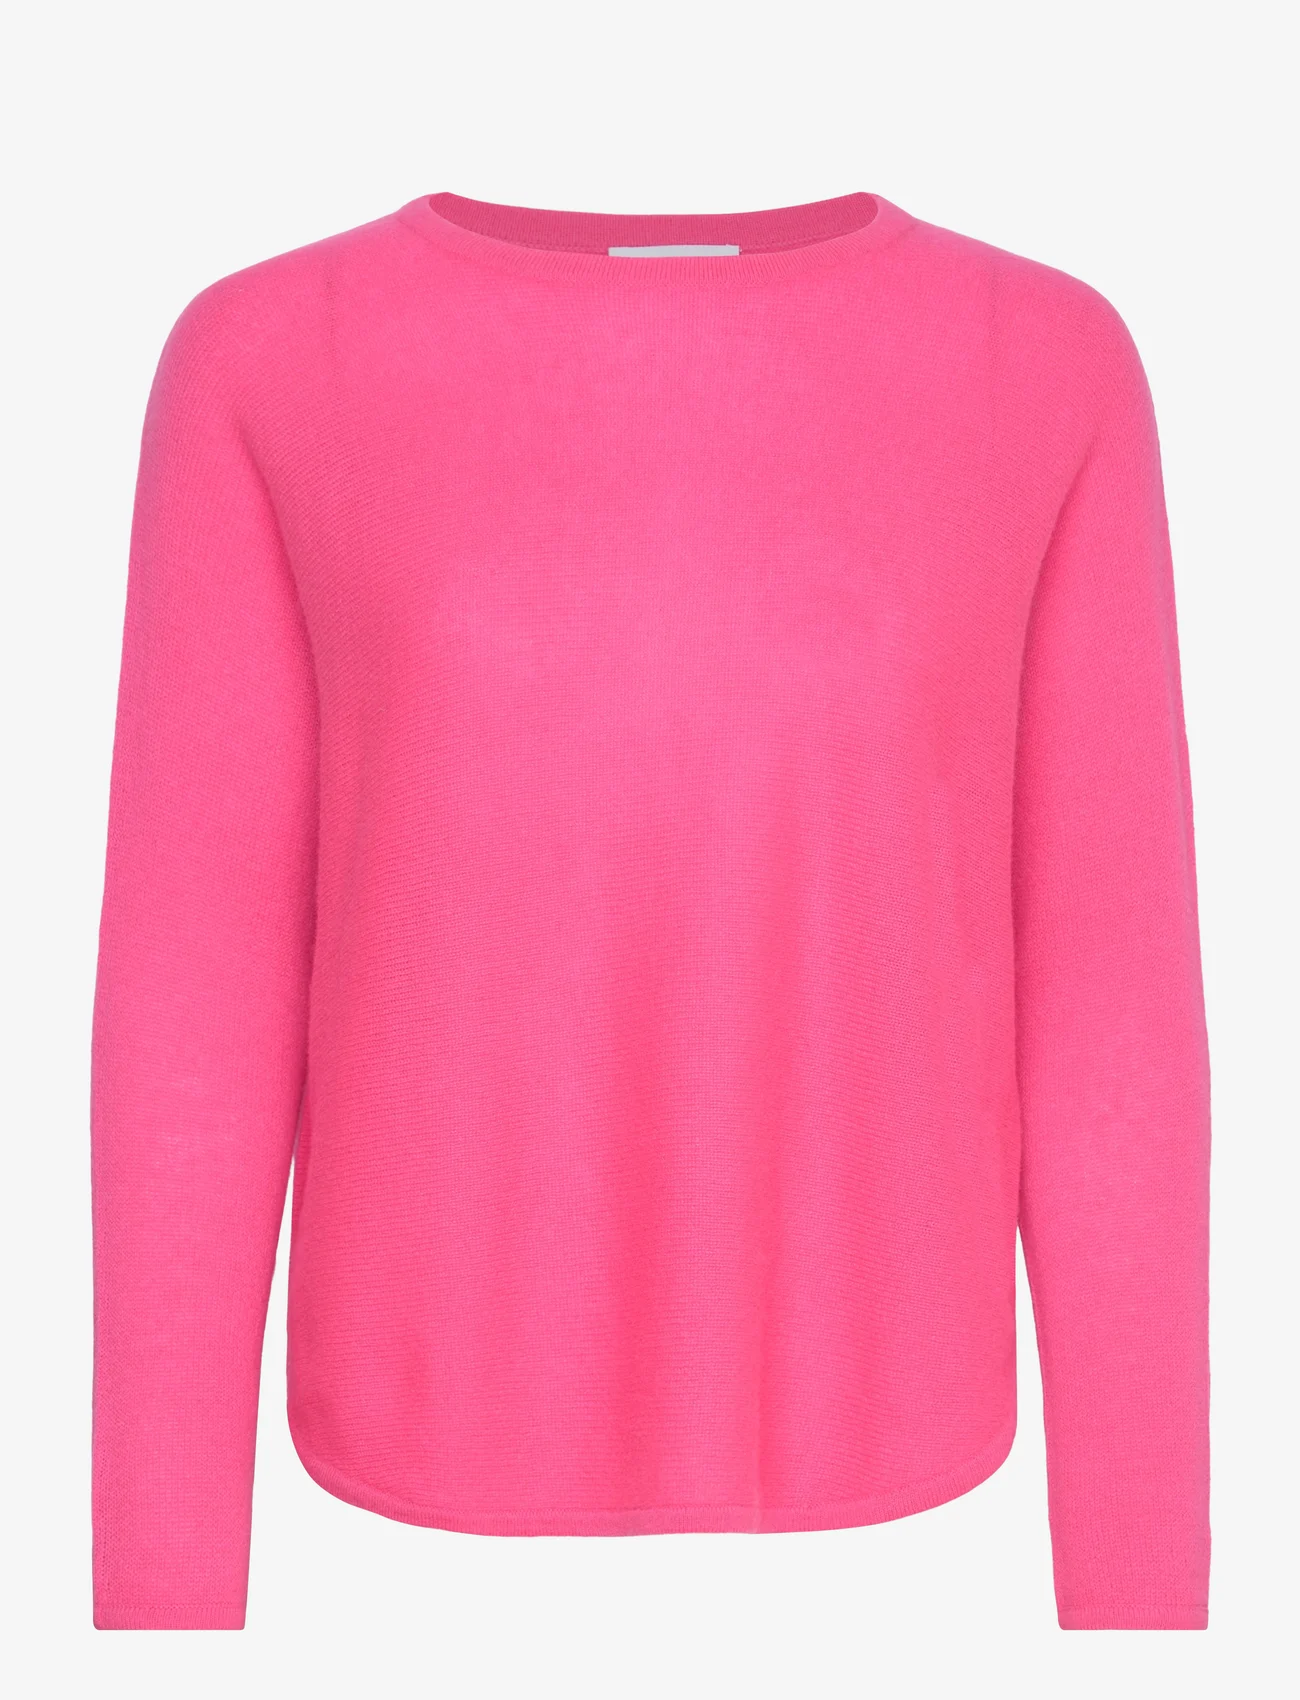 Davida Cashmere - Curved Sweater Loose Tension - jumpers - candy pink - 0